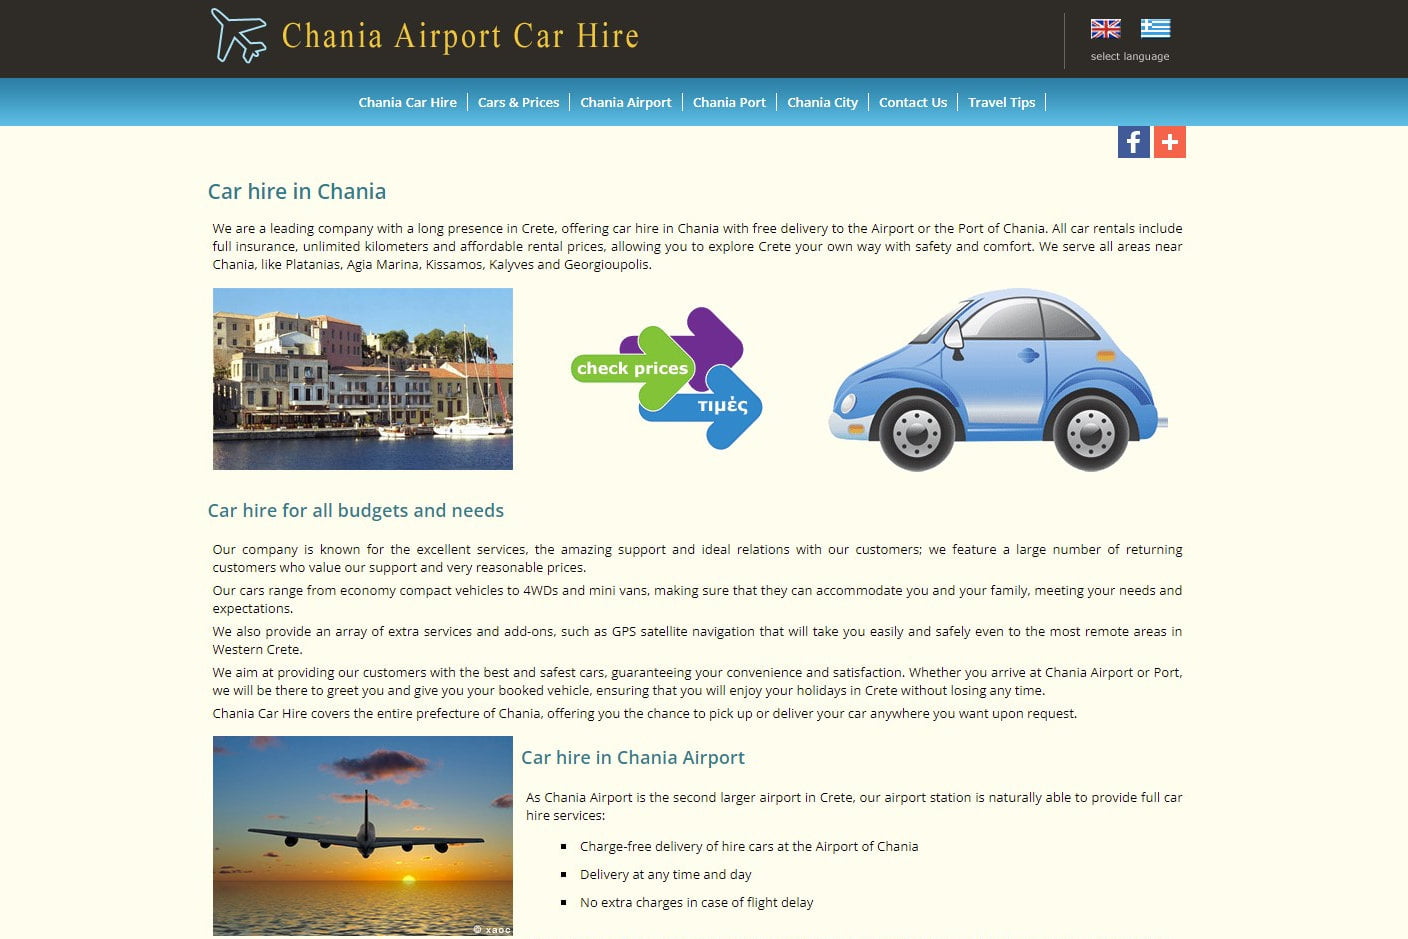 Chania Airport Carhire 